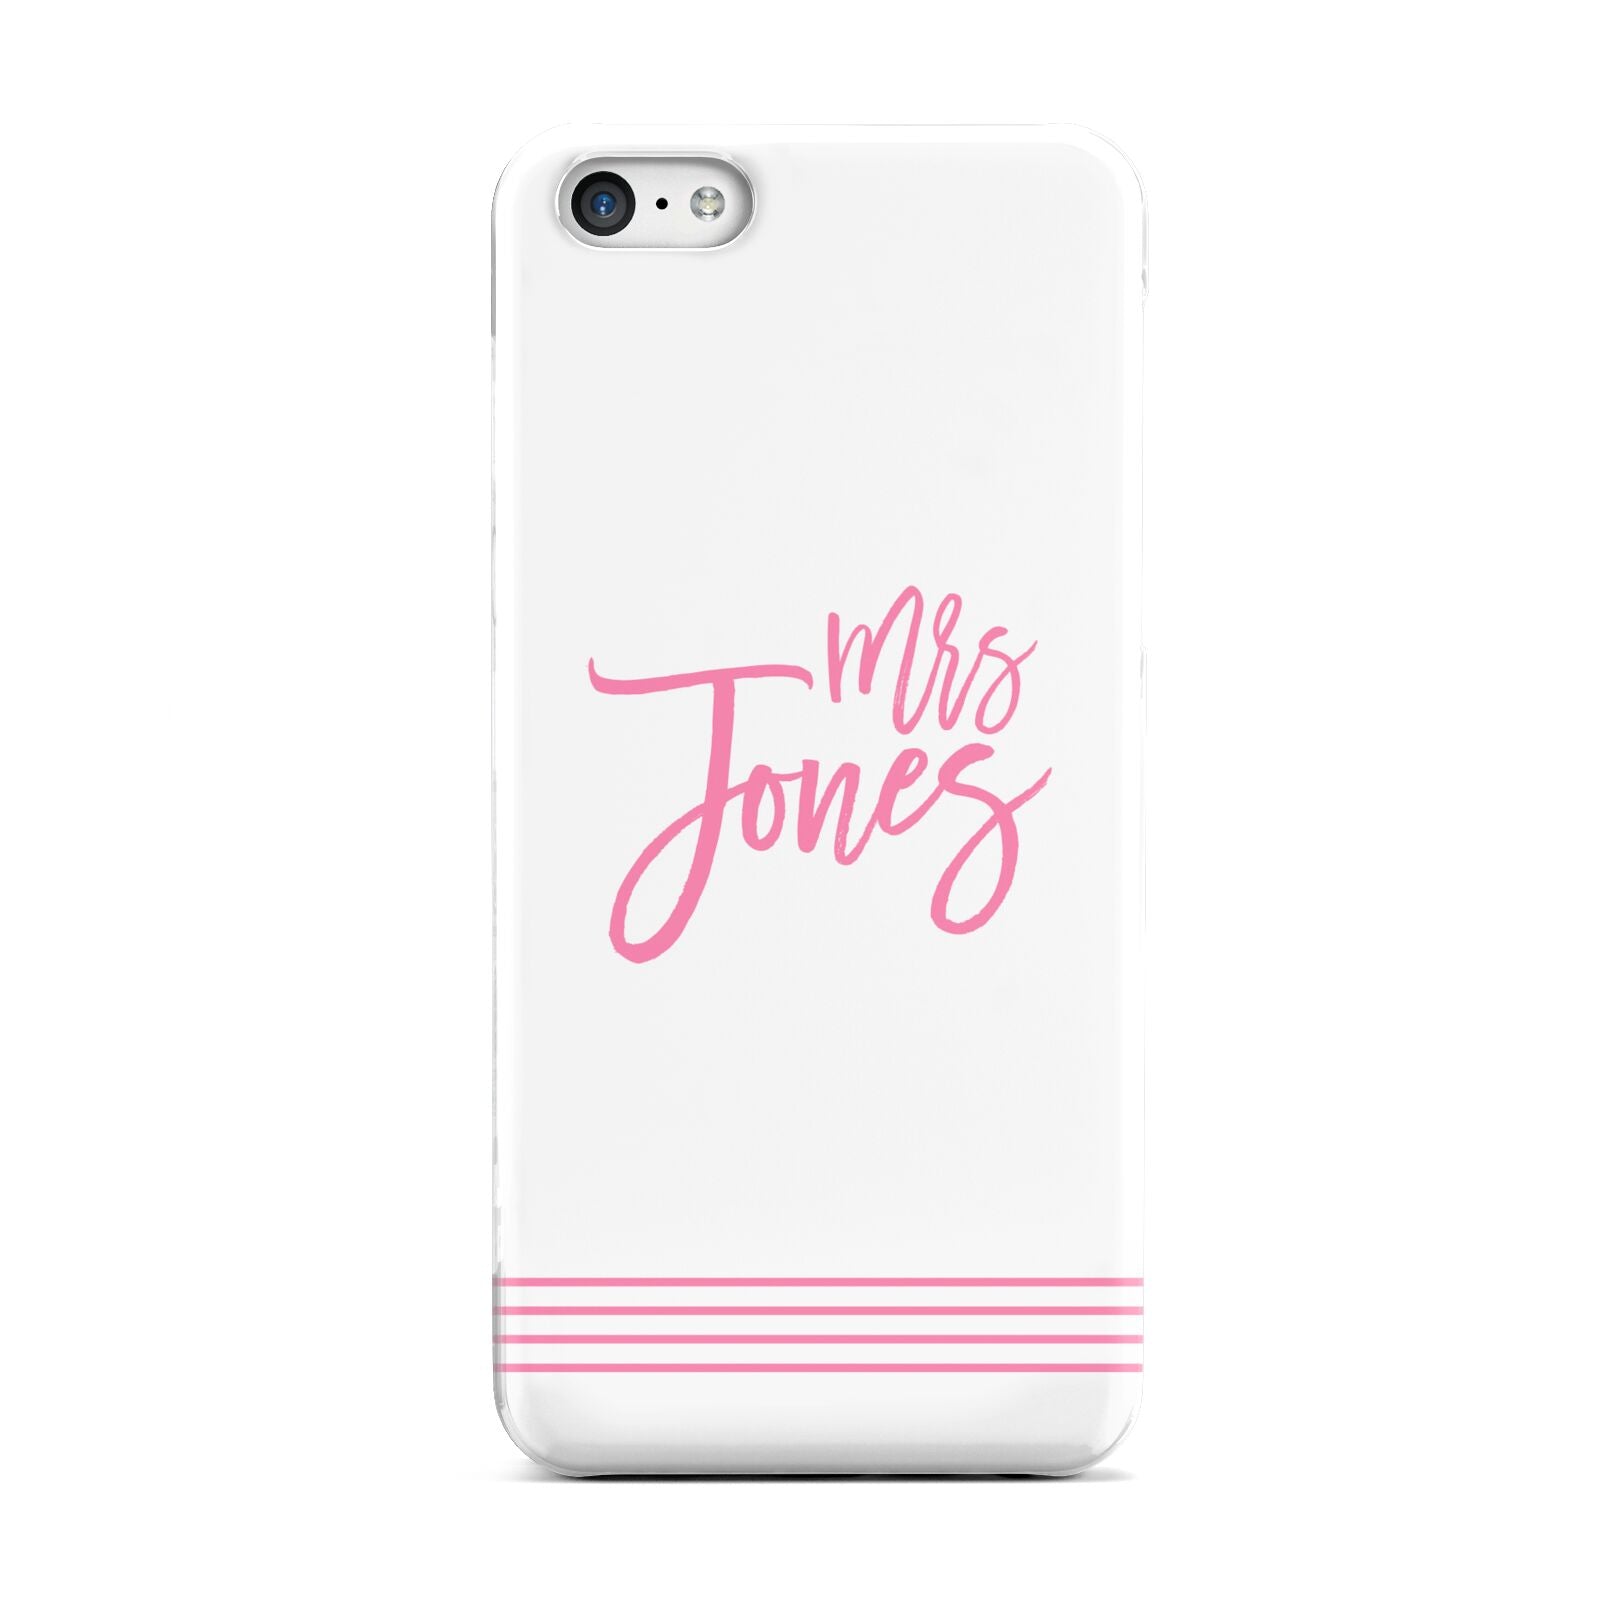 Personalised Hers Apple iPhone 5c Case